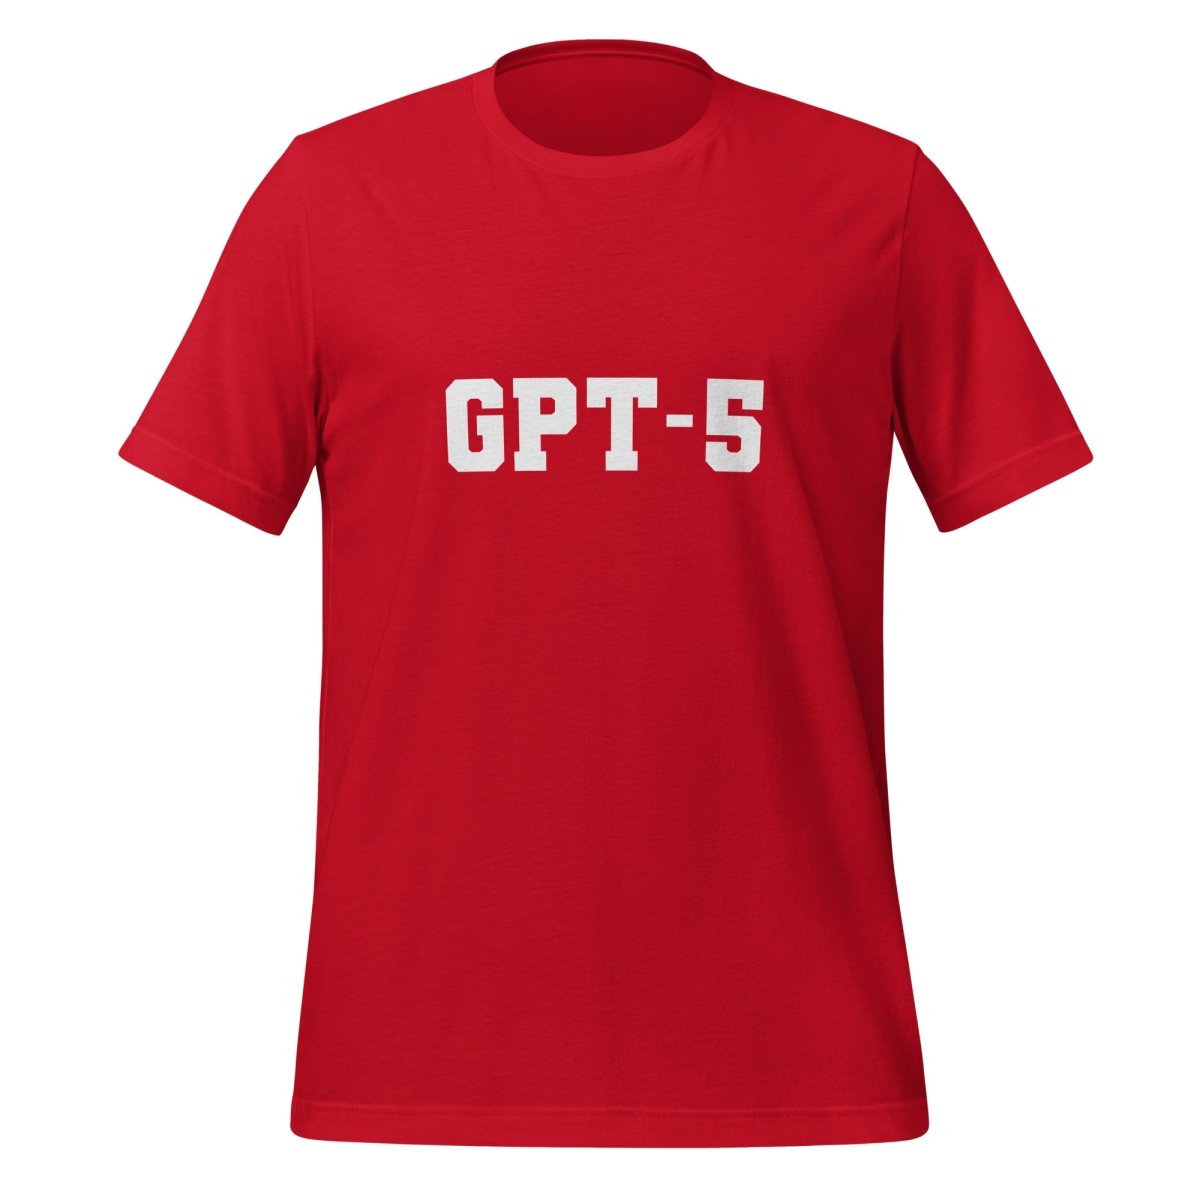 GPT - 5 T - Shirt 3 (unisex) - Red - AI Store